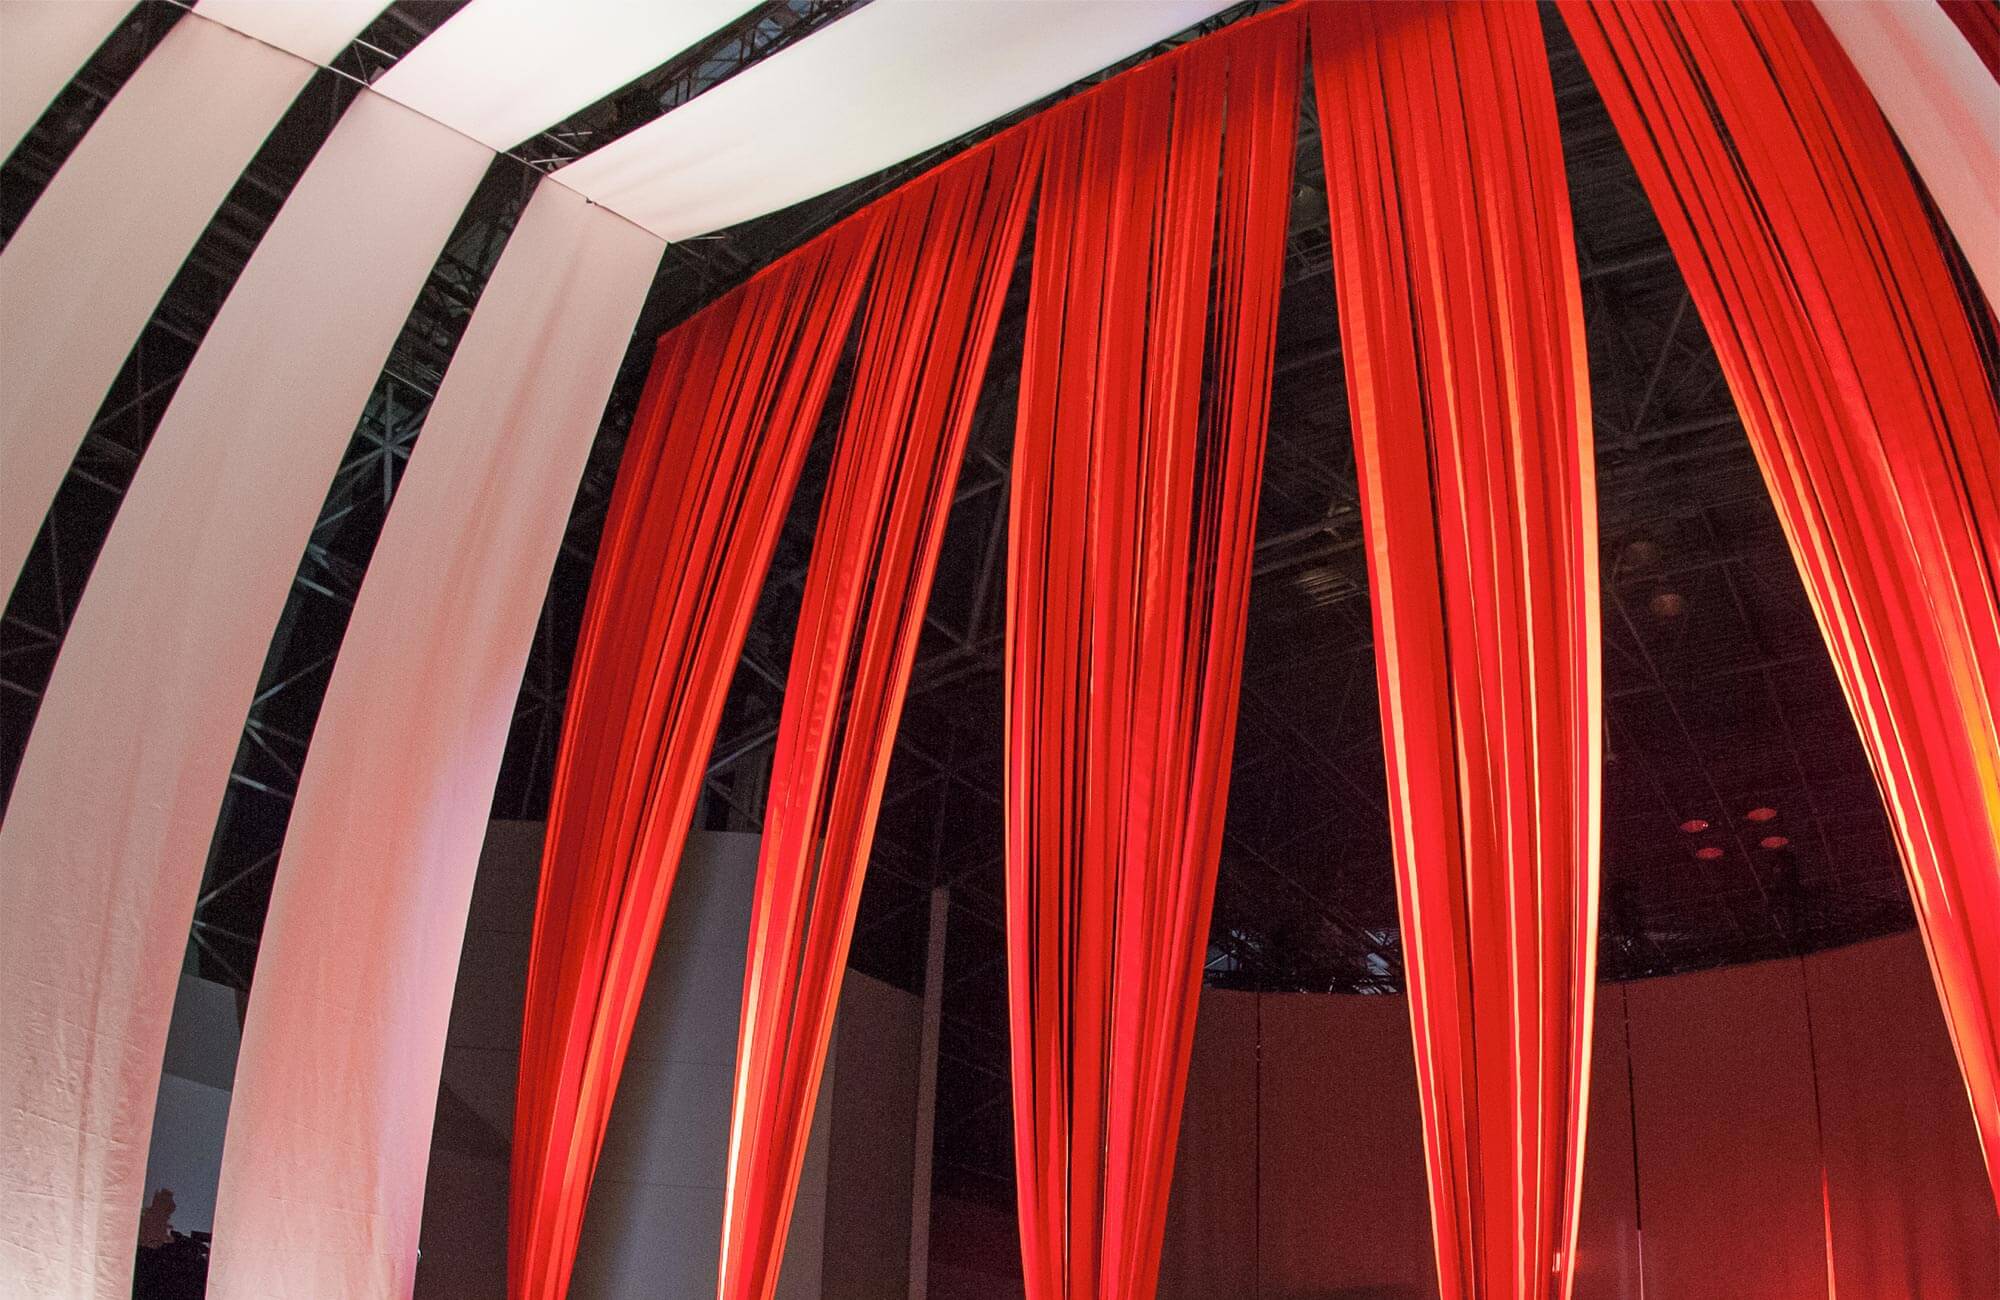 Looking up at the Hall of Fame curtain made using strips of Sunbrella Orange fabric.